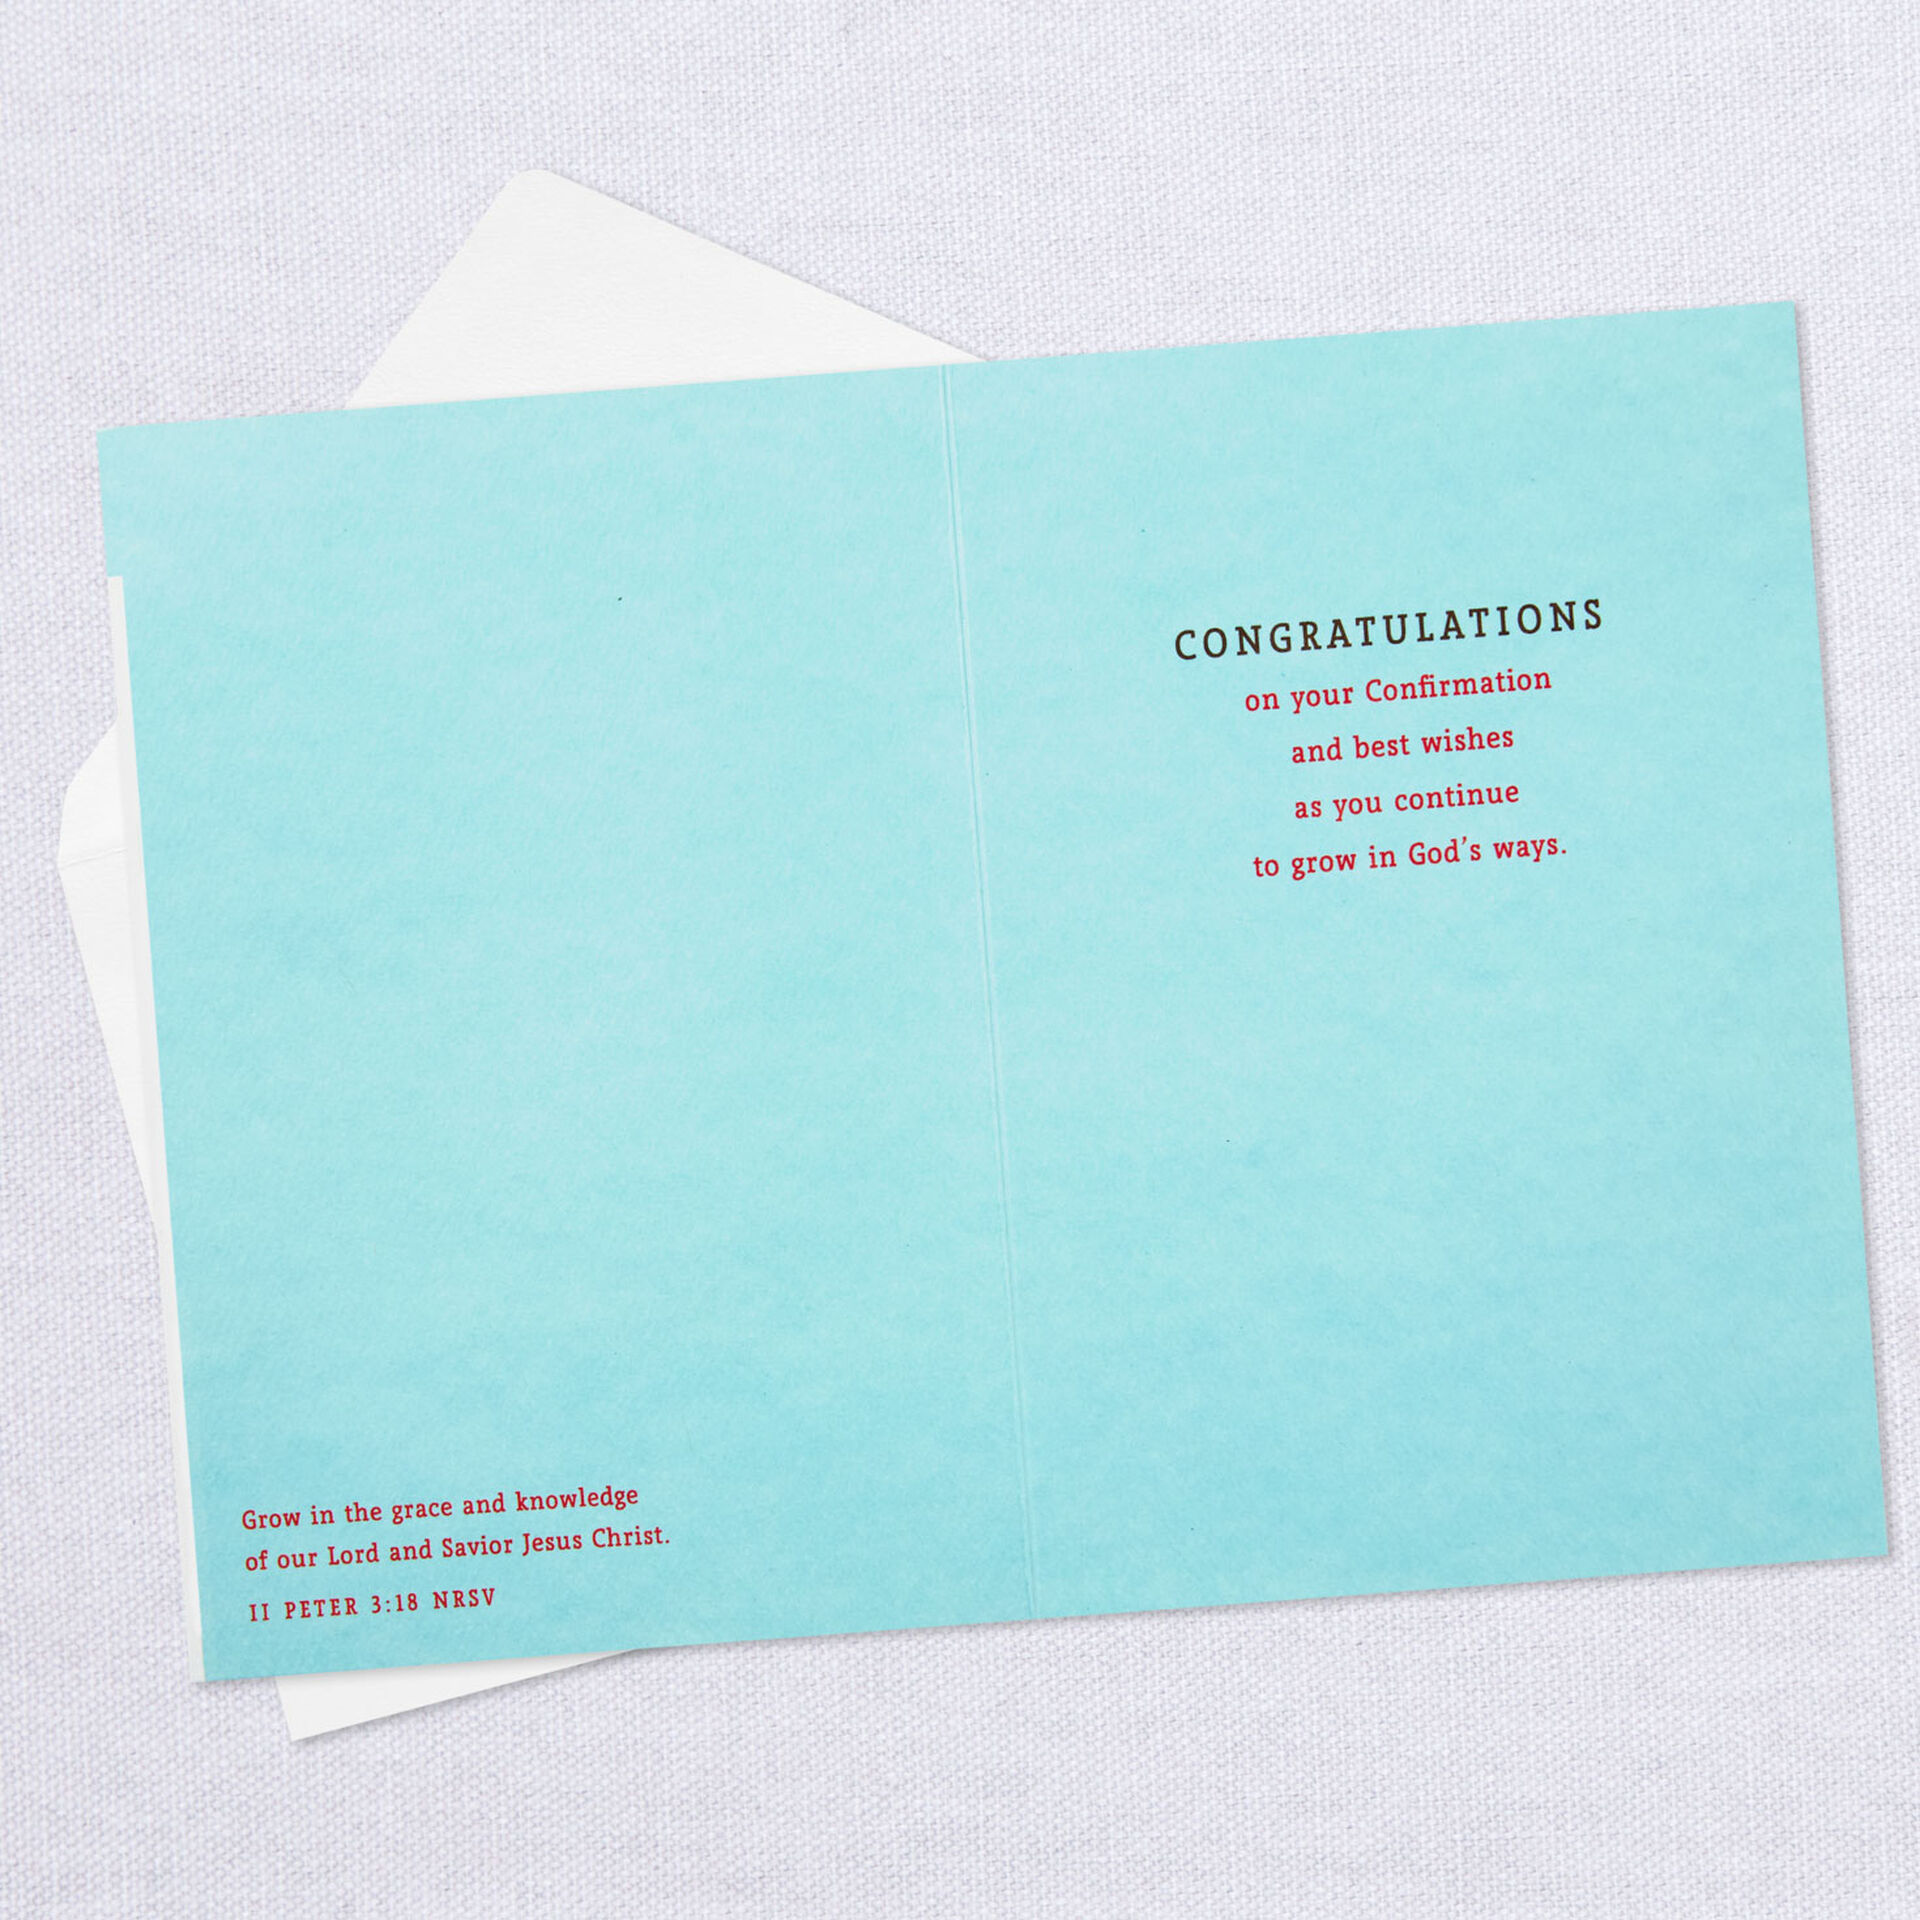 Place-in-the-World-Confirmation-Card_459CEY2149_03